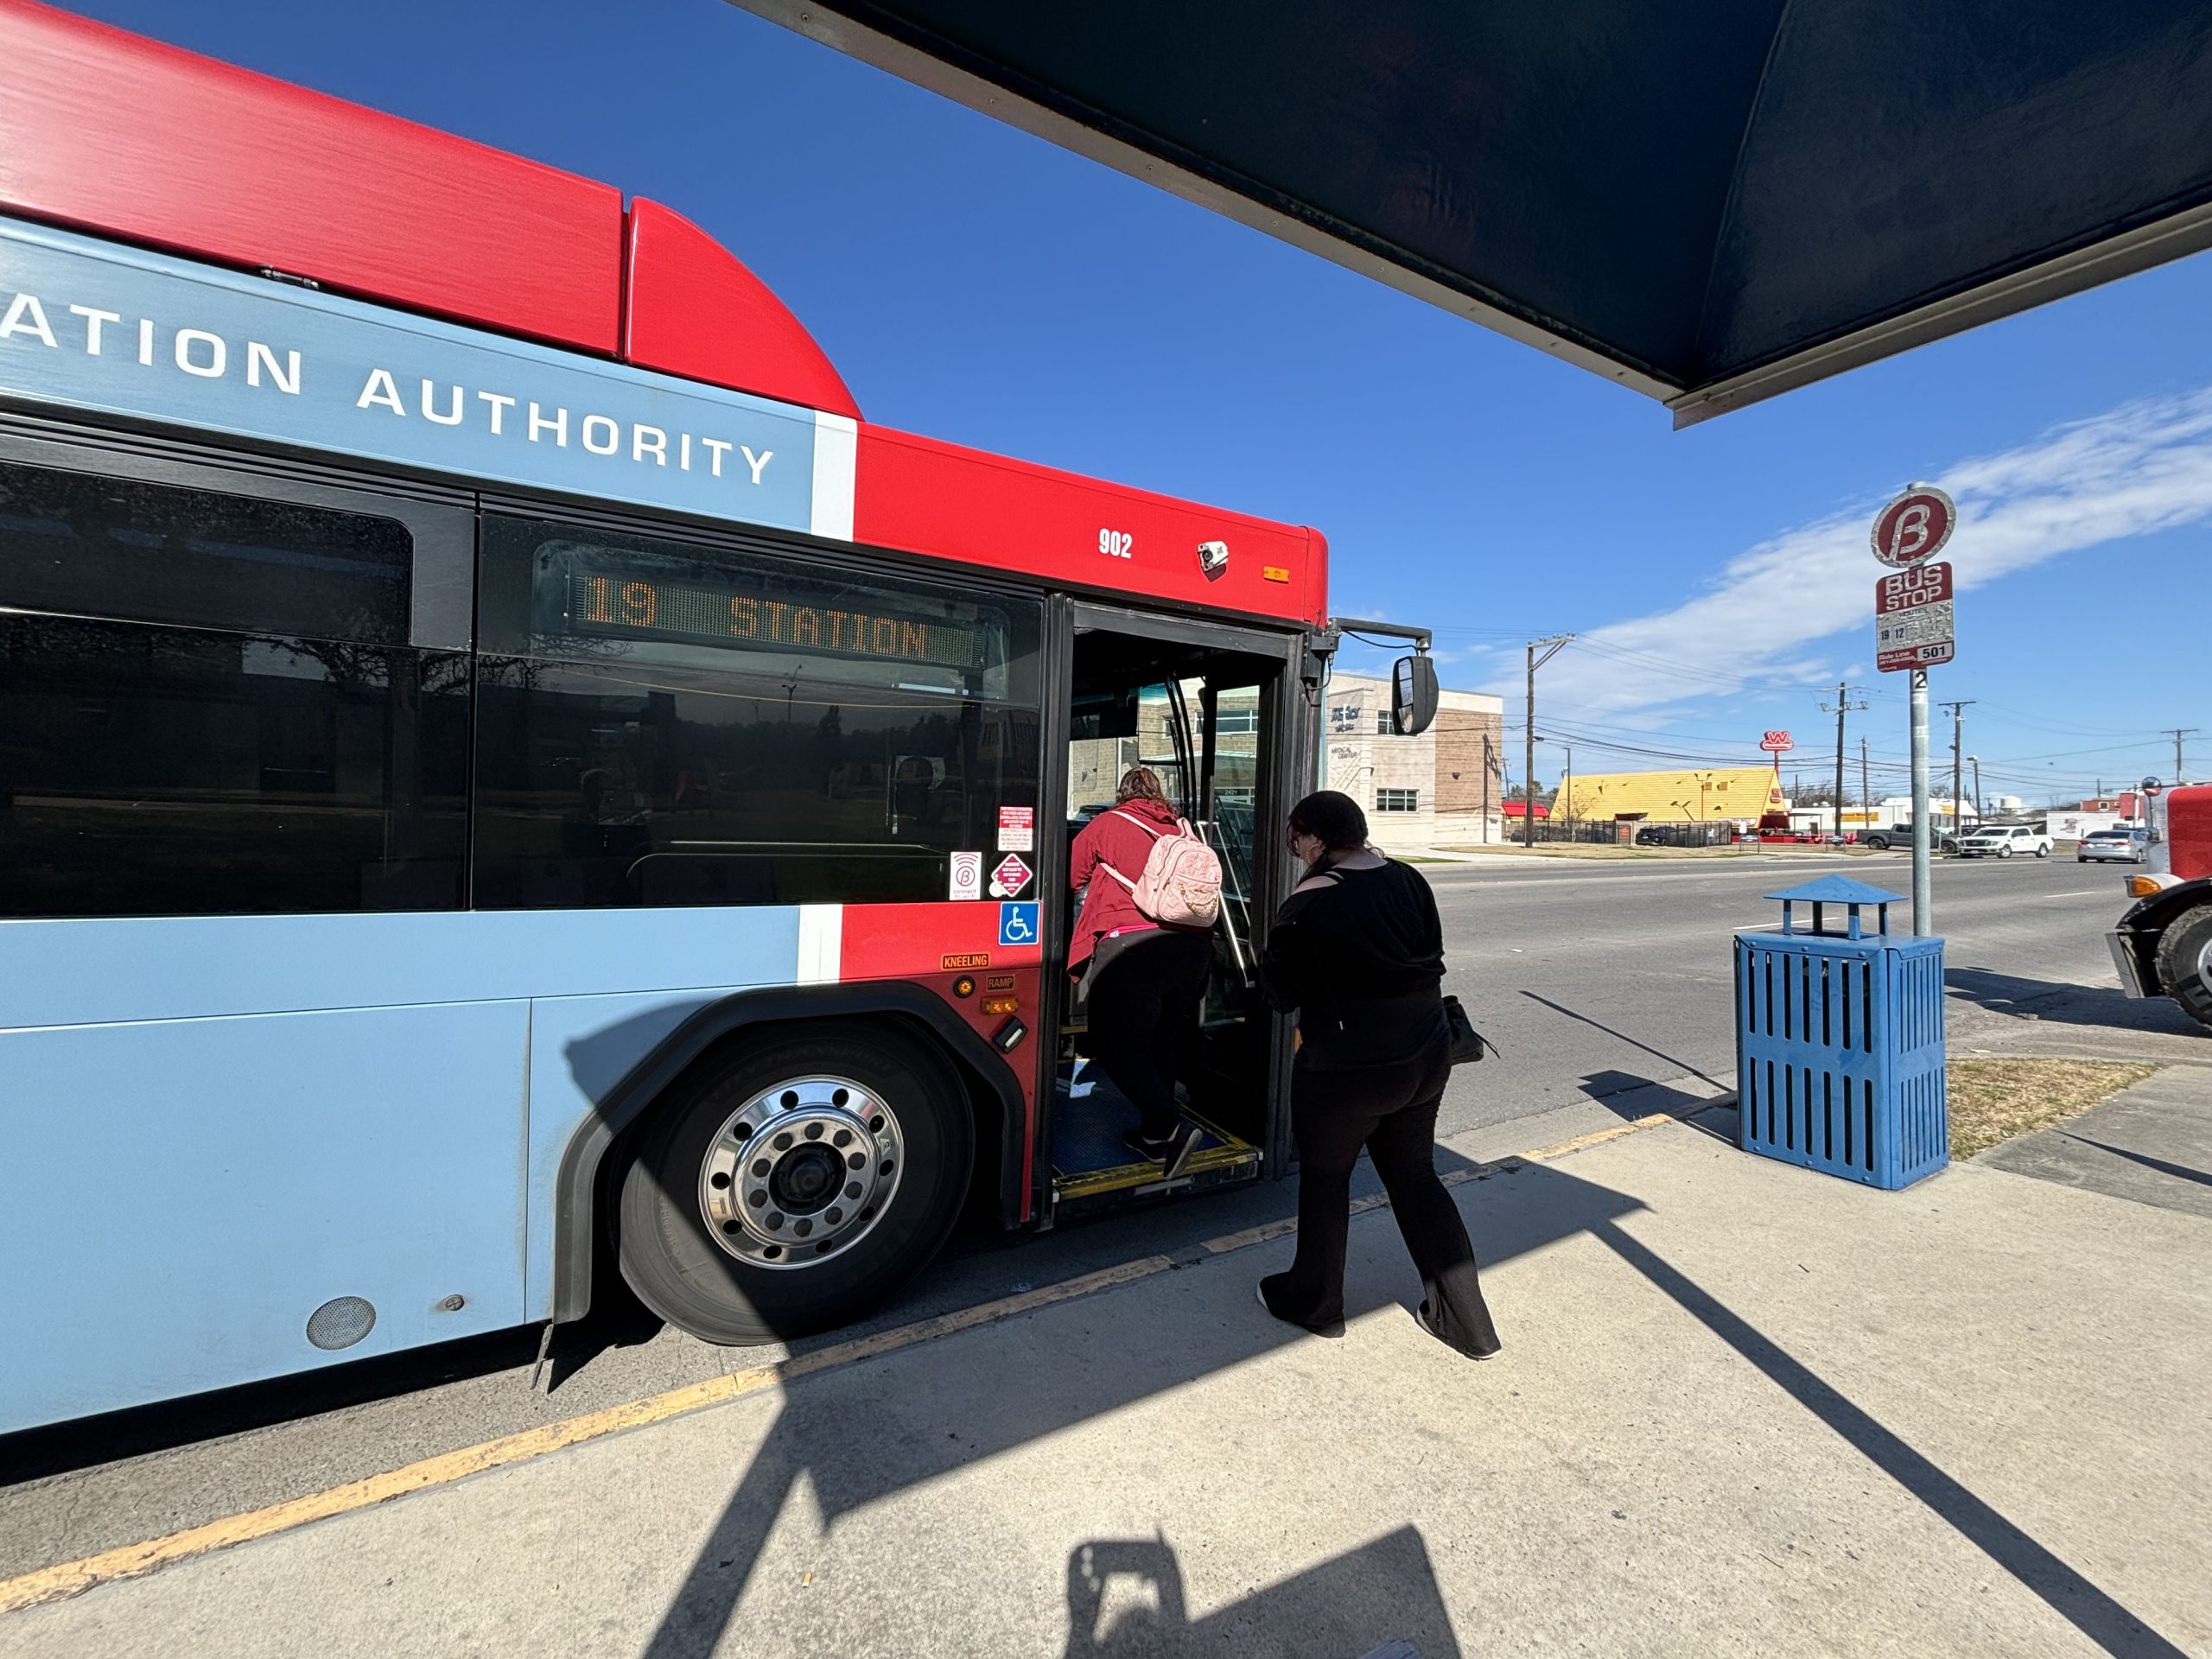 Connecting commuters in Corpus Christi